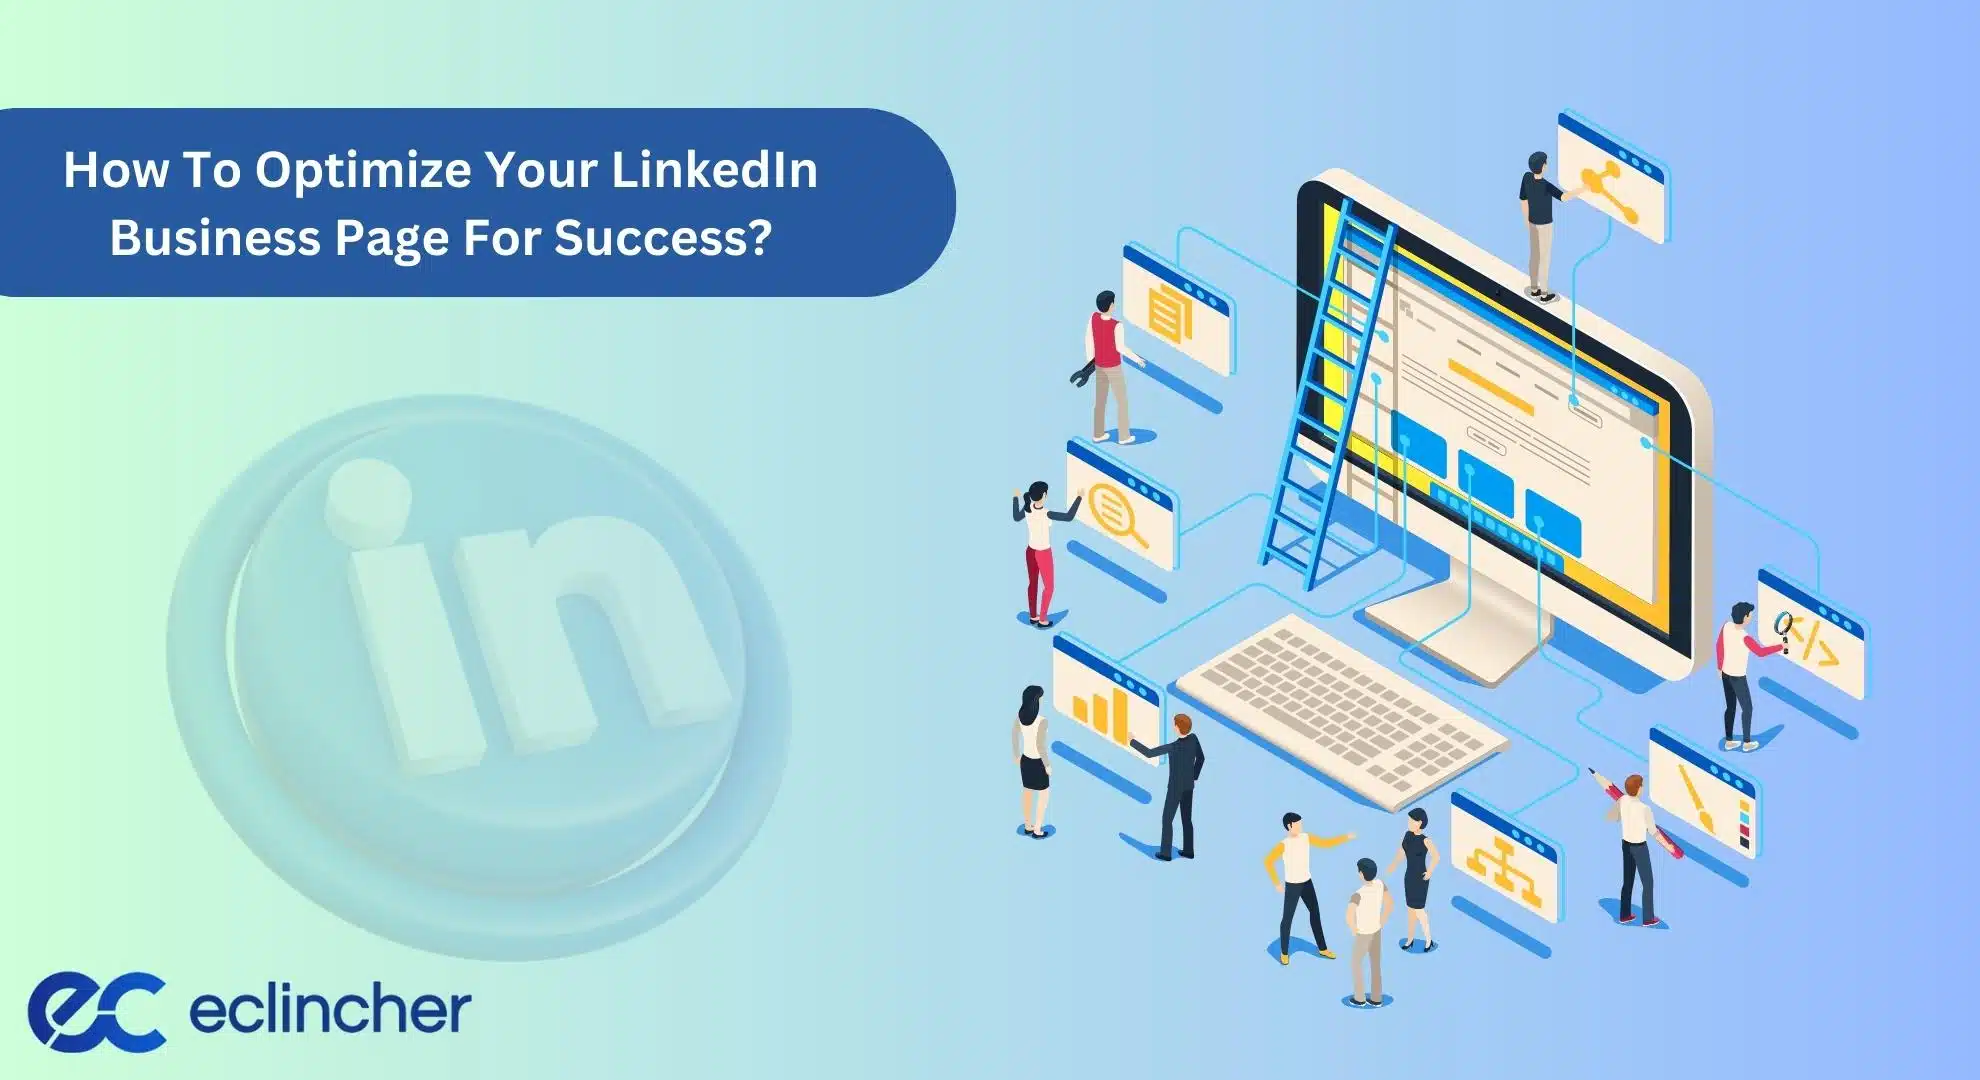 How To Optimize Your LinkedIn Business Page For Success